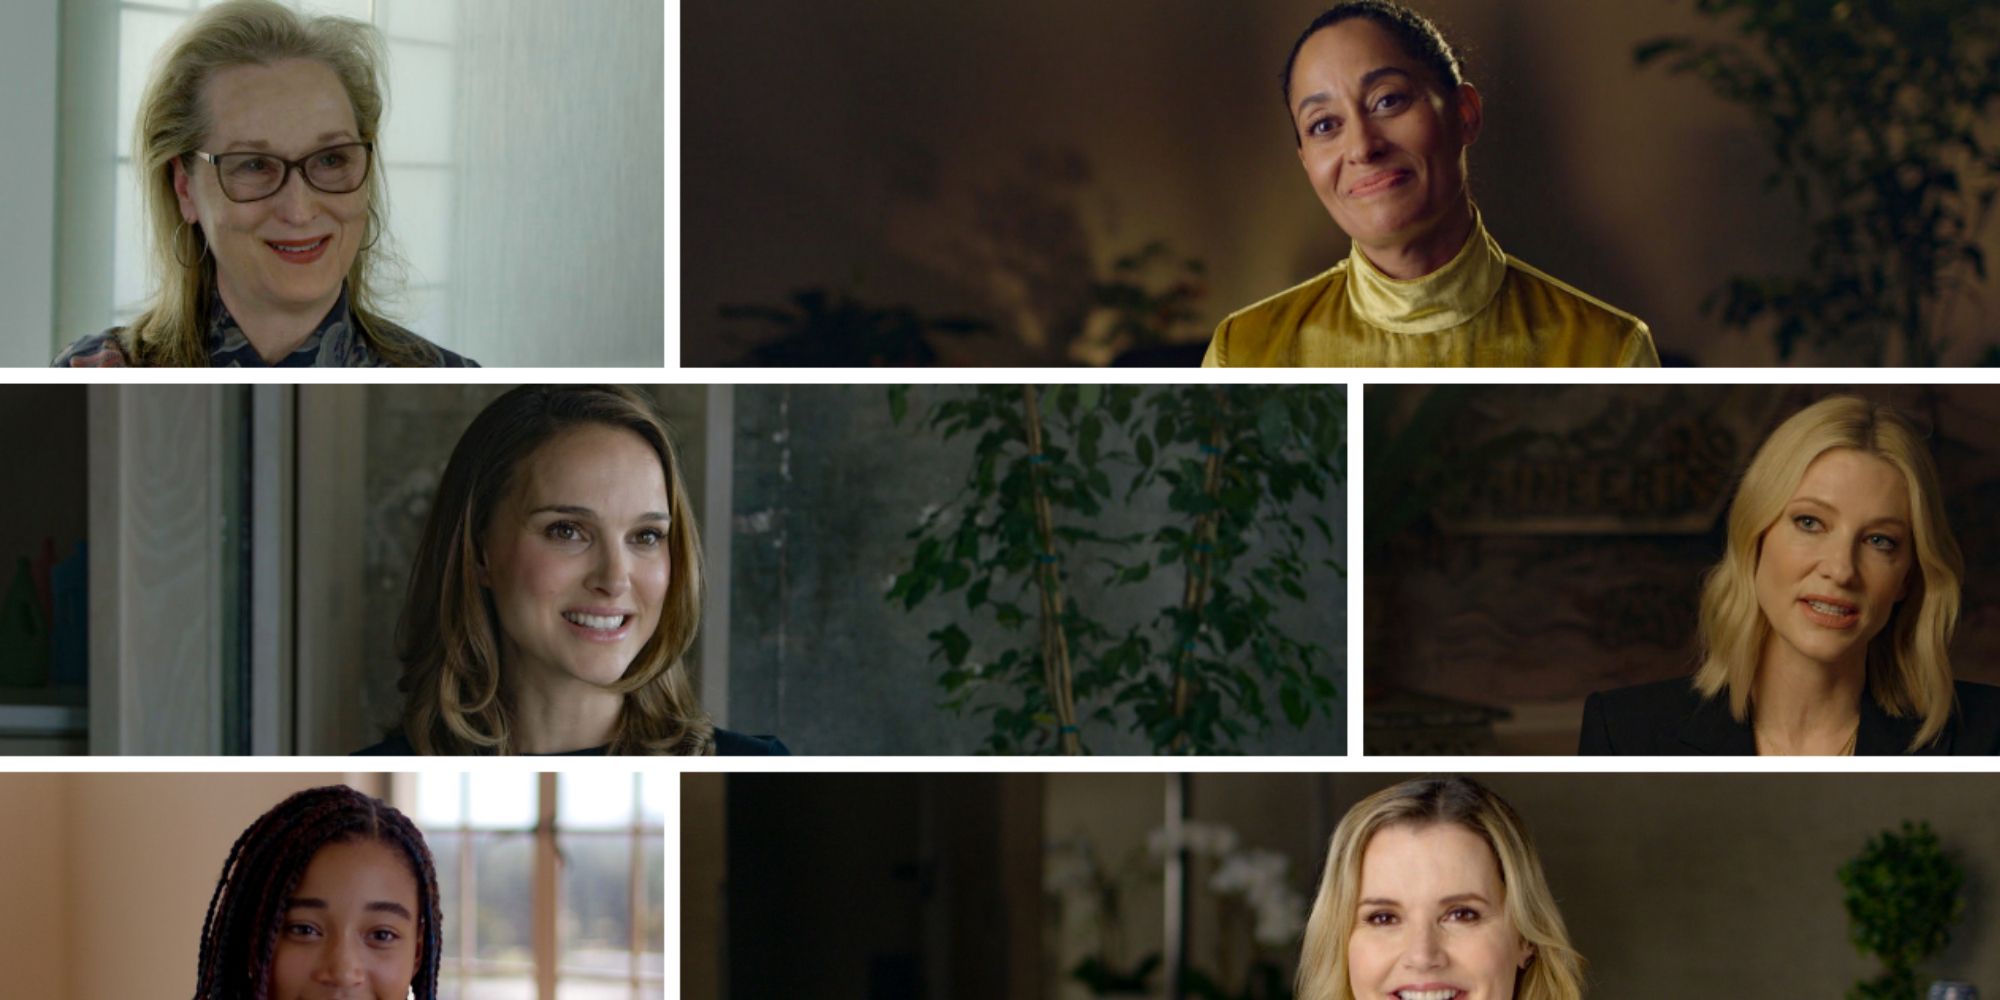 Des actrices comme Natalie Portman, Cate Blanchett et Meryl Streep dans This Changes Everything